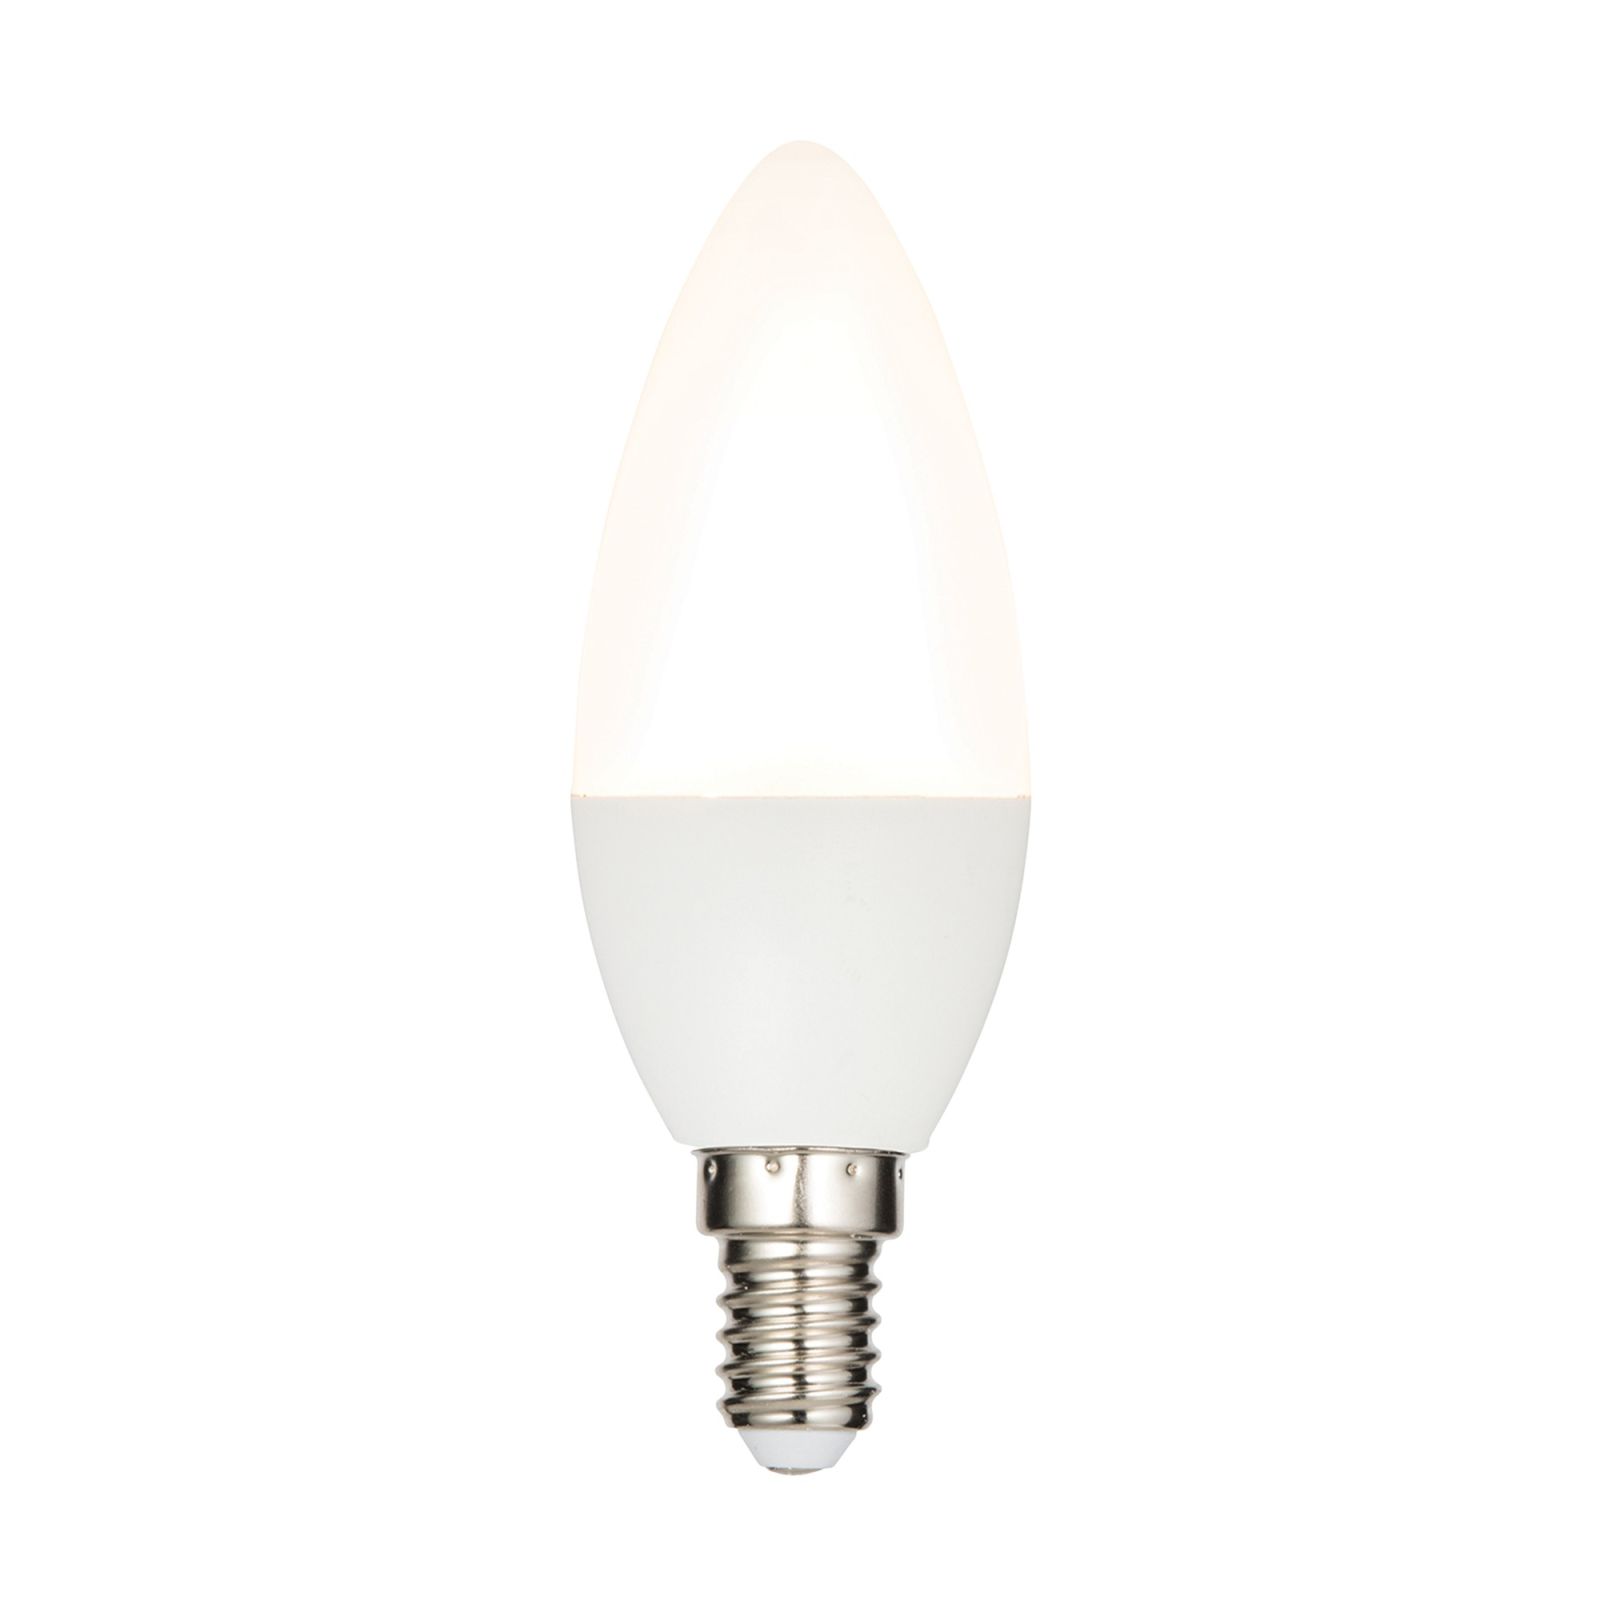 E14 LED candle dimmable 4.5W warm white